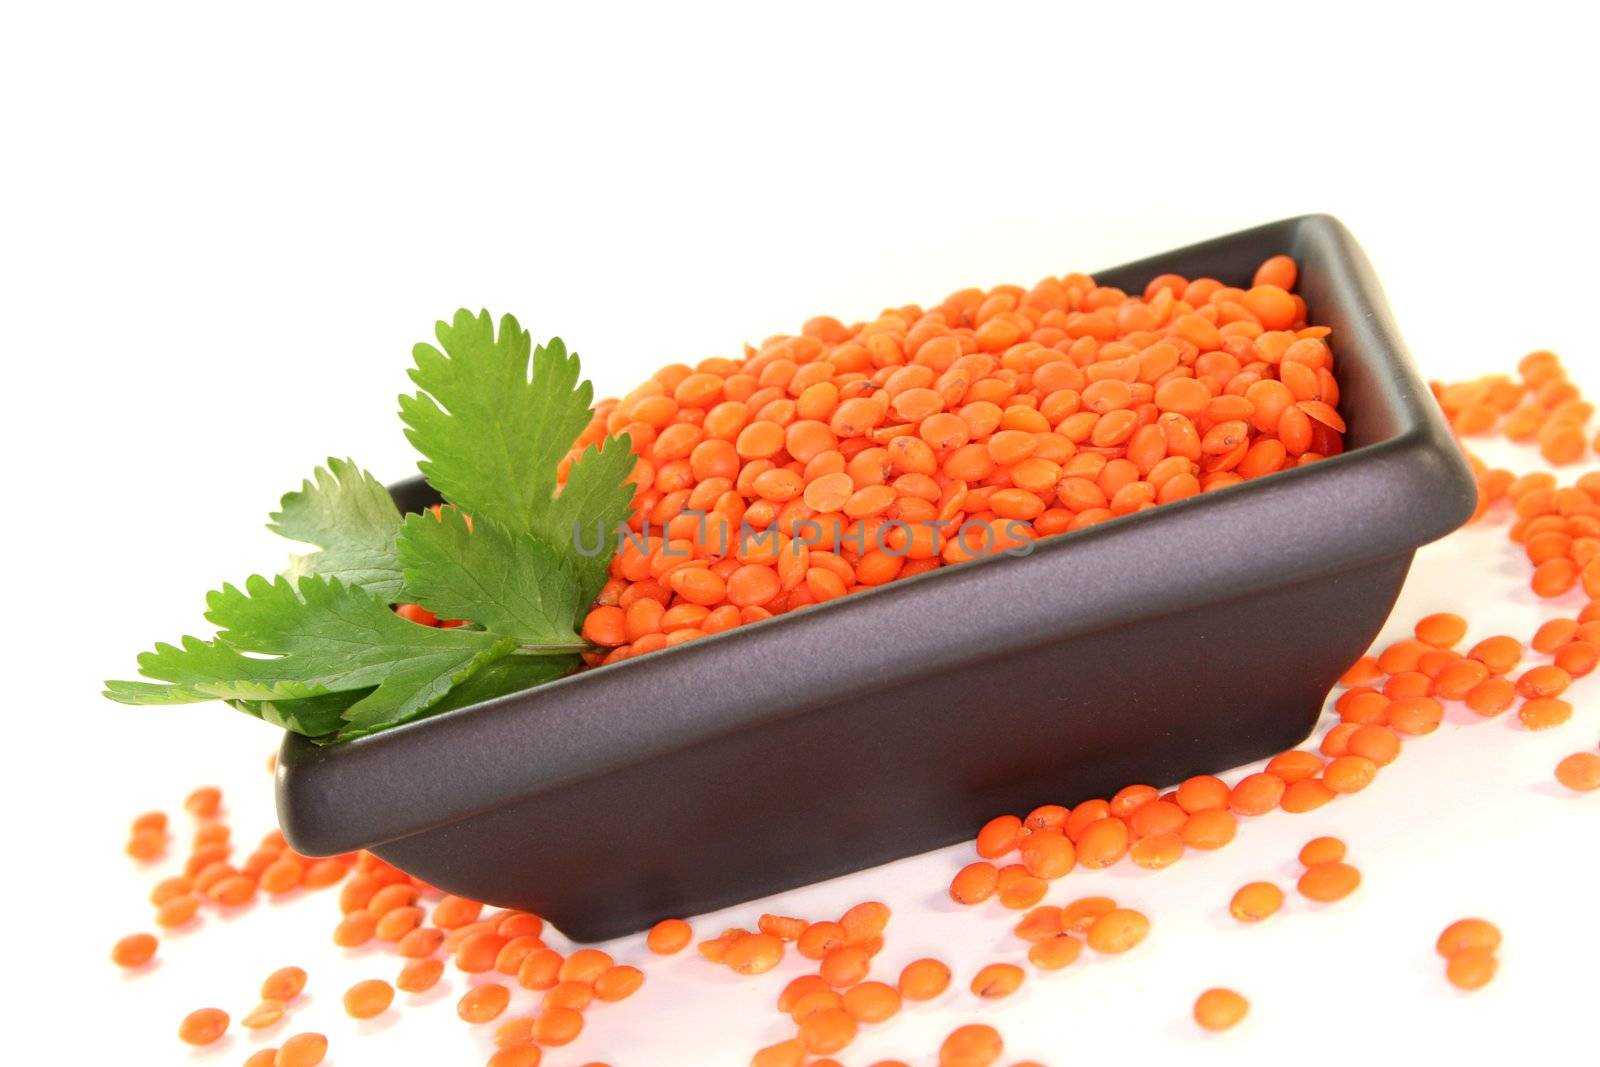 dried red lentils with coriander on a white background